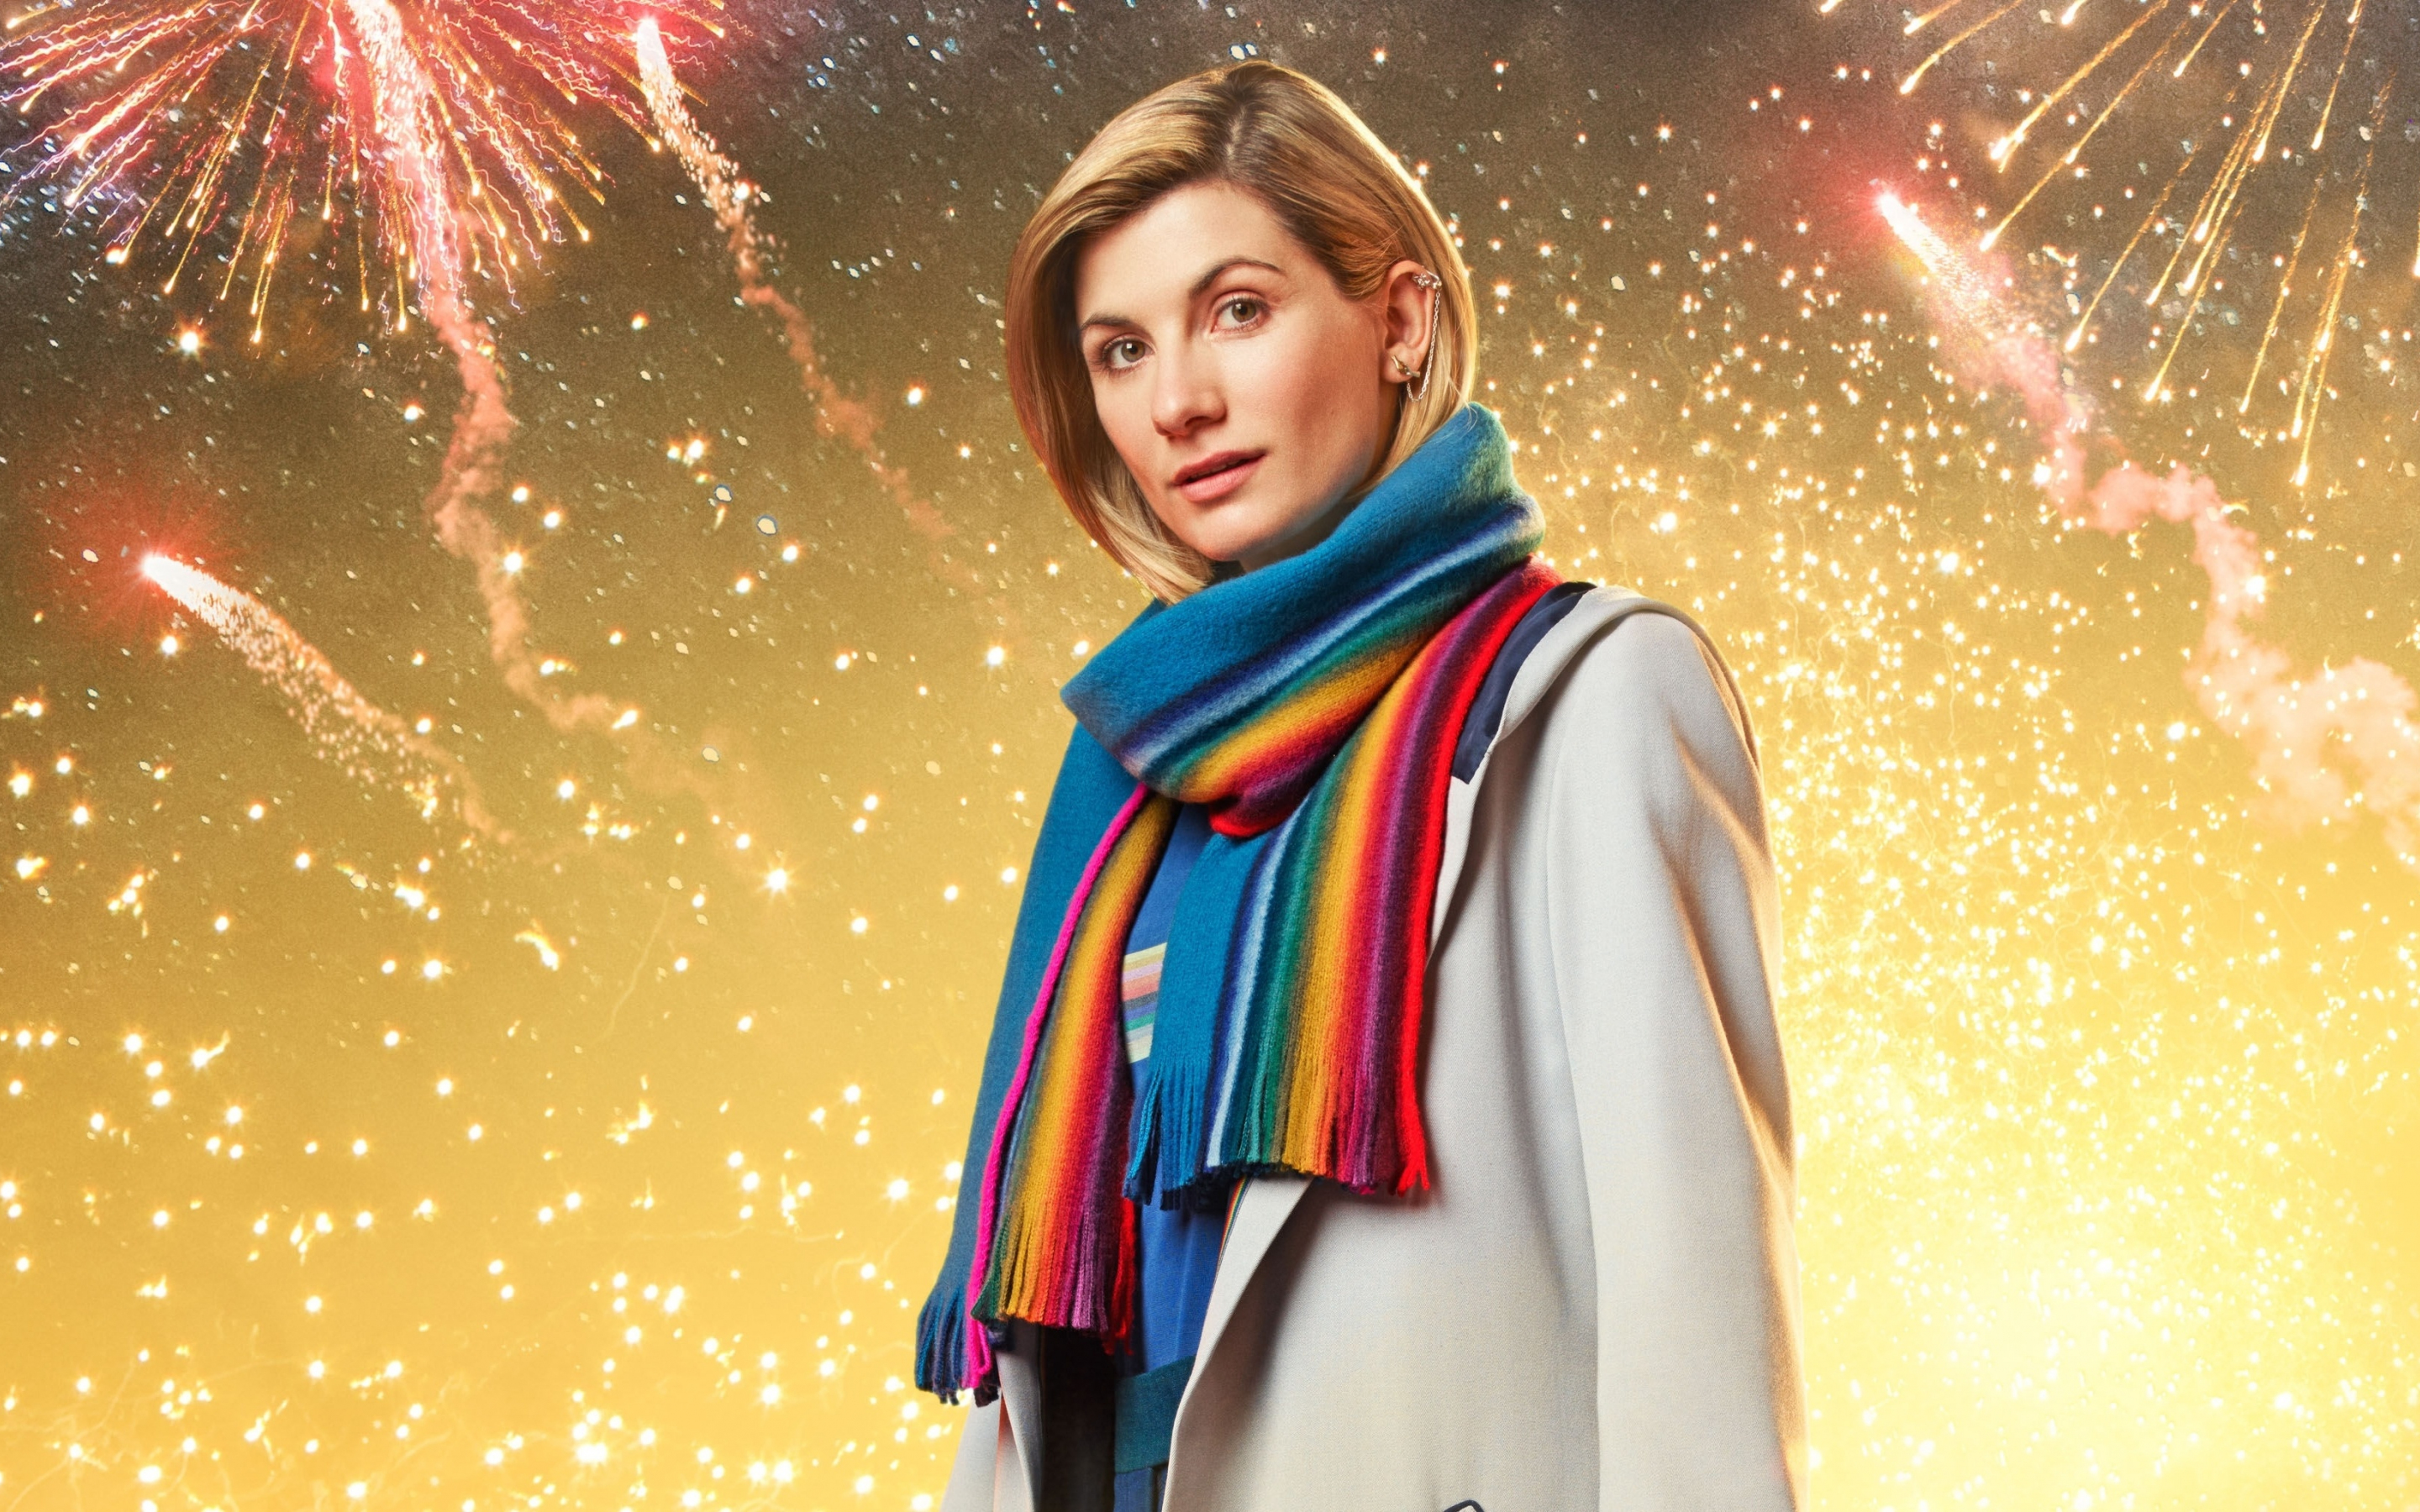 TV show, Jodie Whittaker, celebrity, Doctor Who, 2880x1800 wallpaper